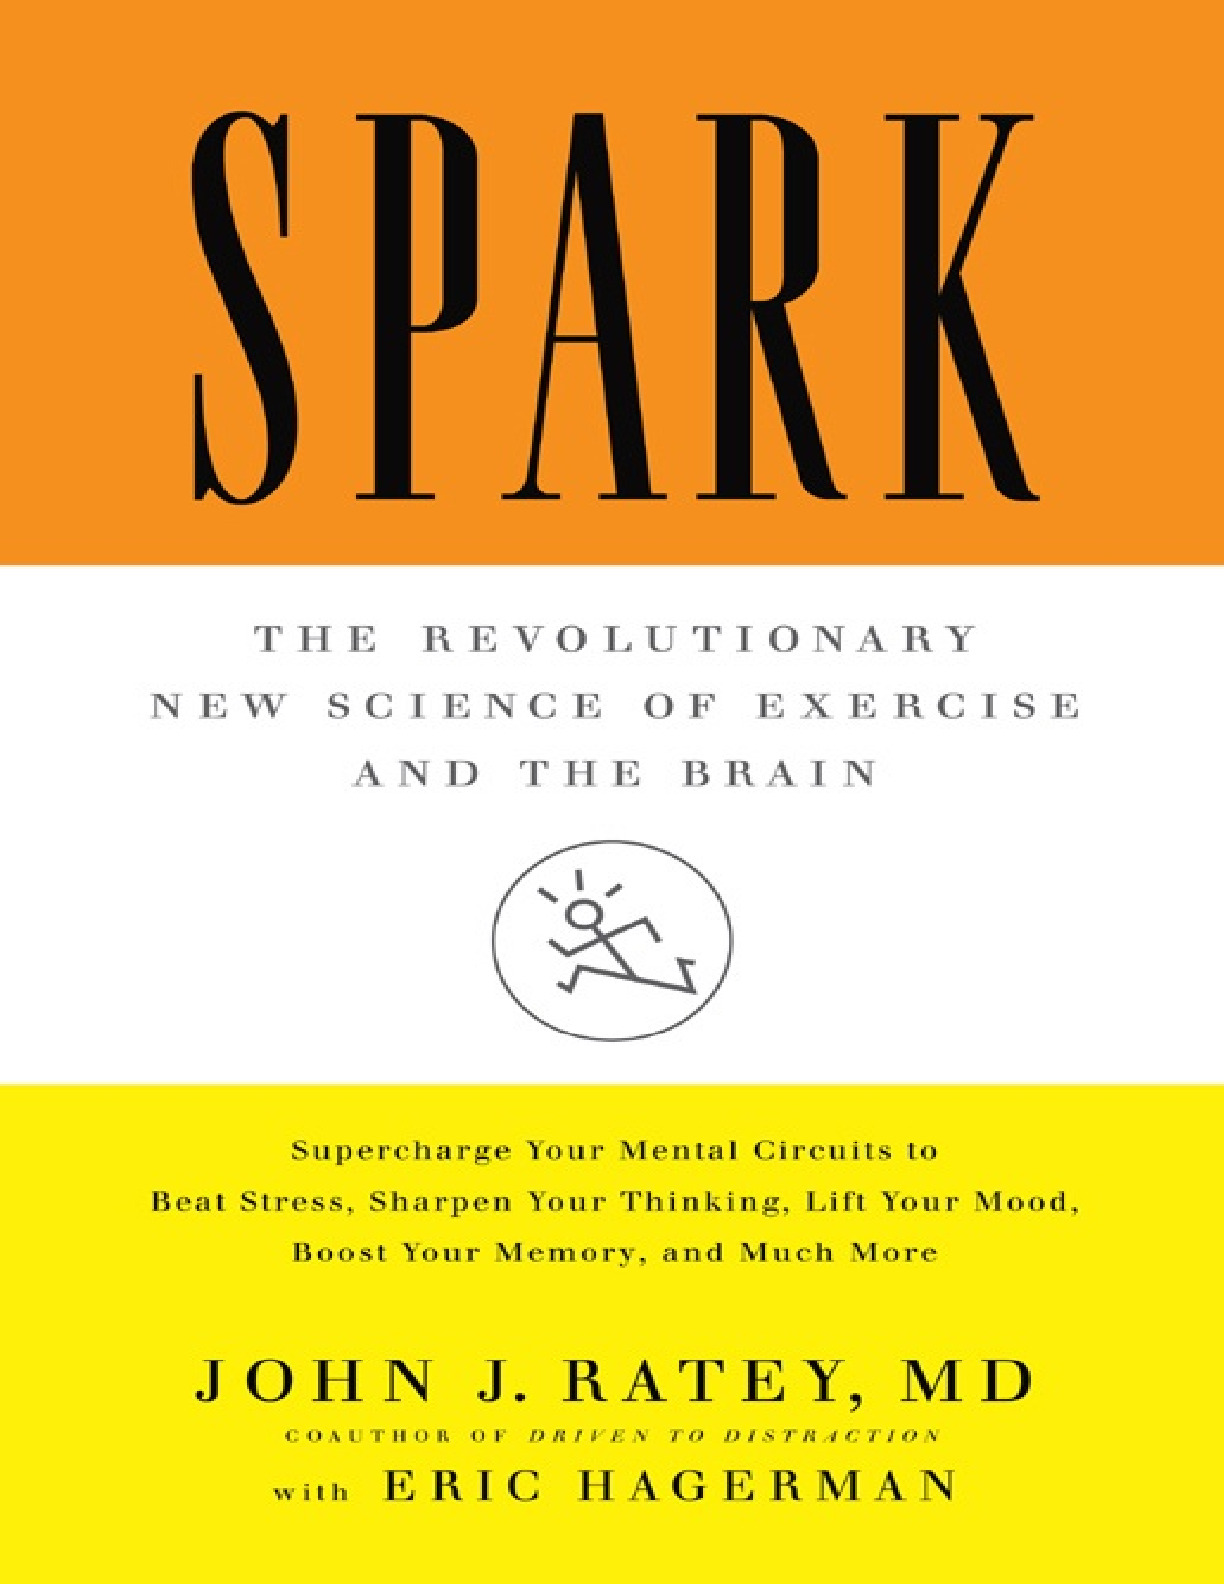 The Revolutionary New Science of Exercise and the Brain